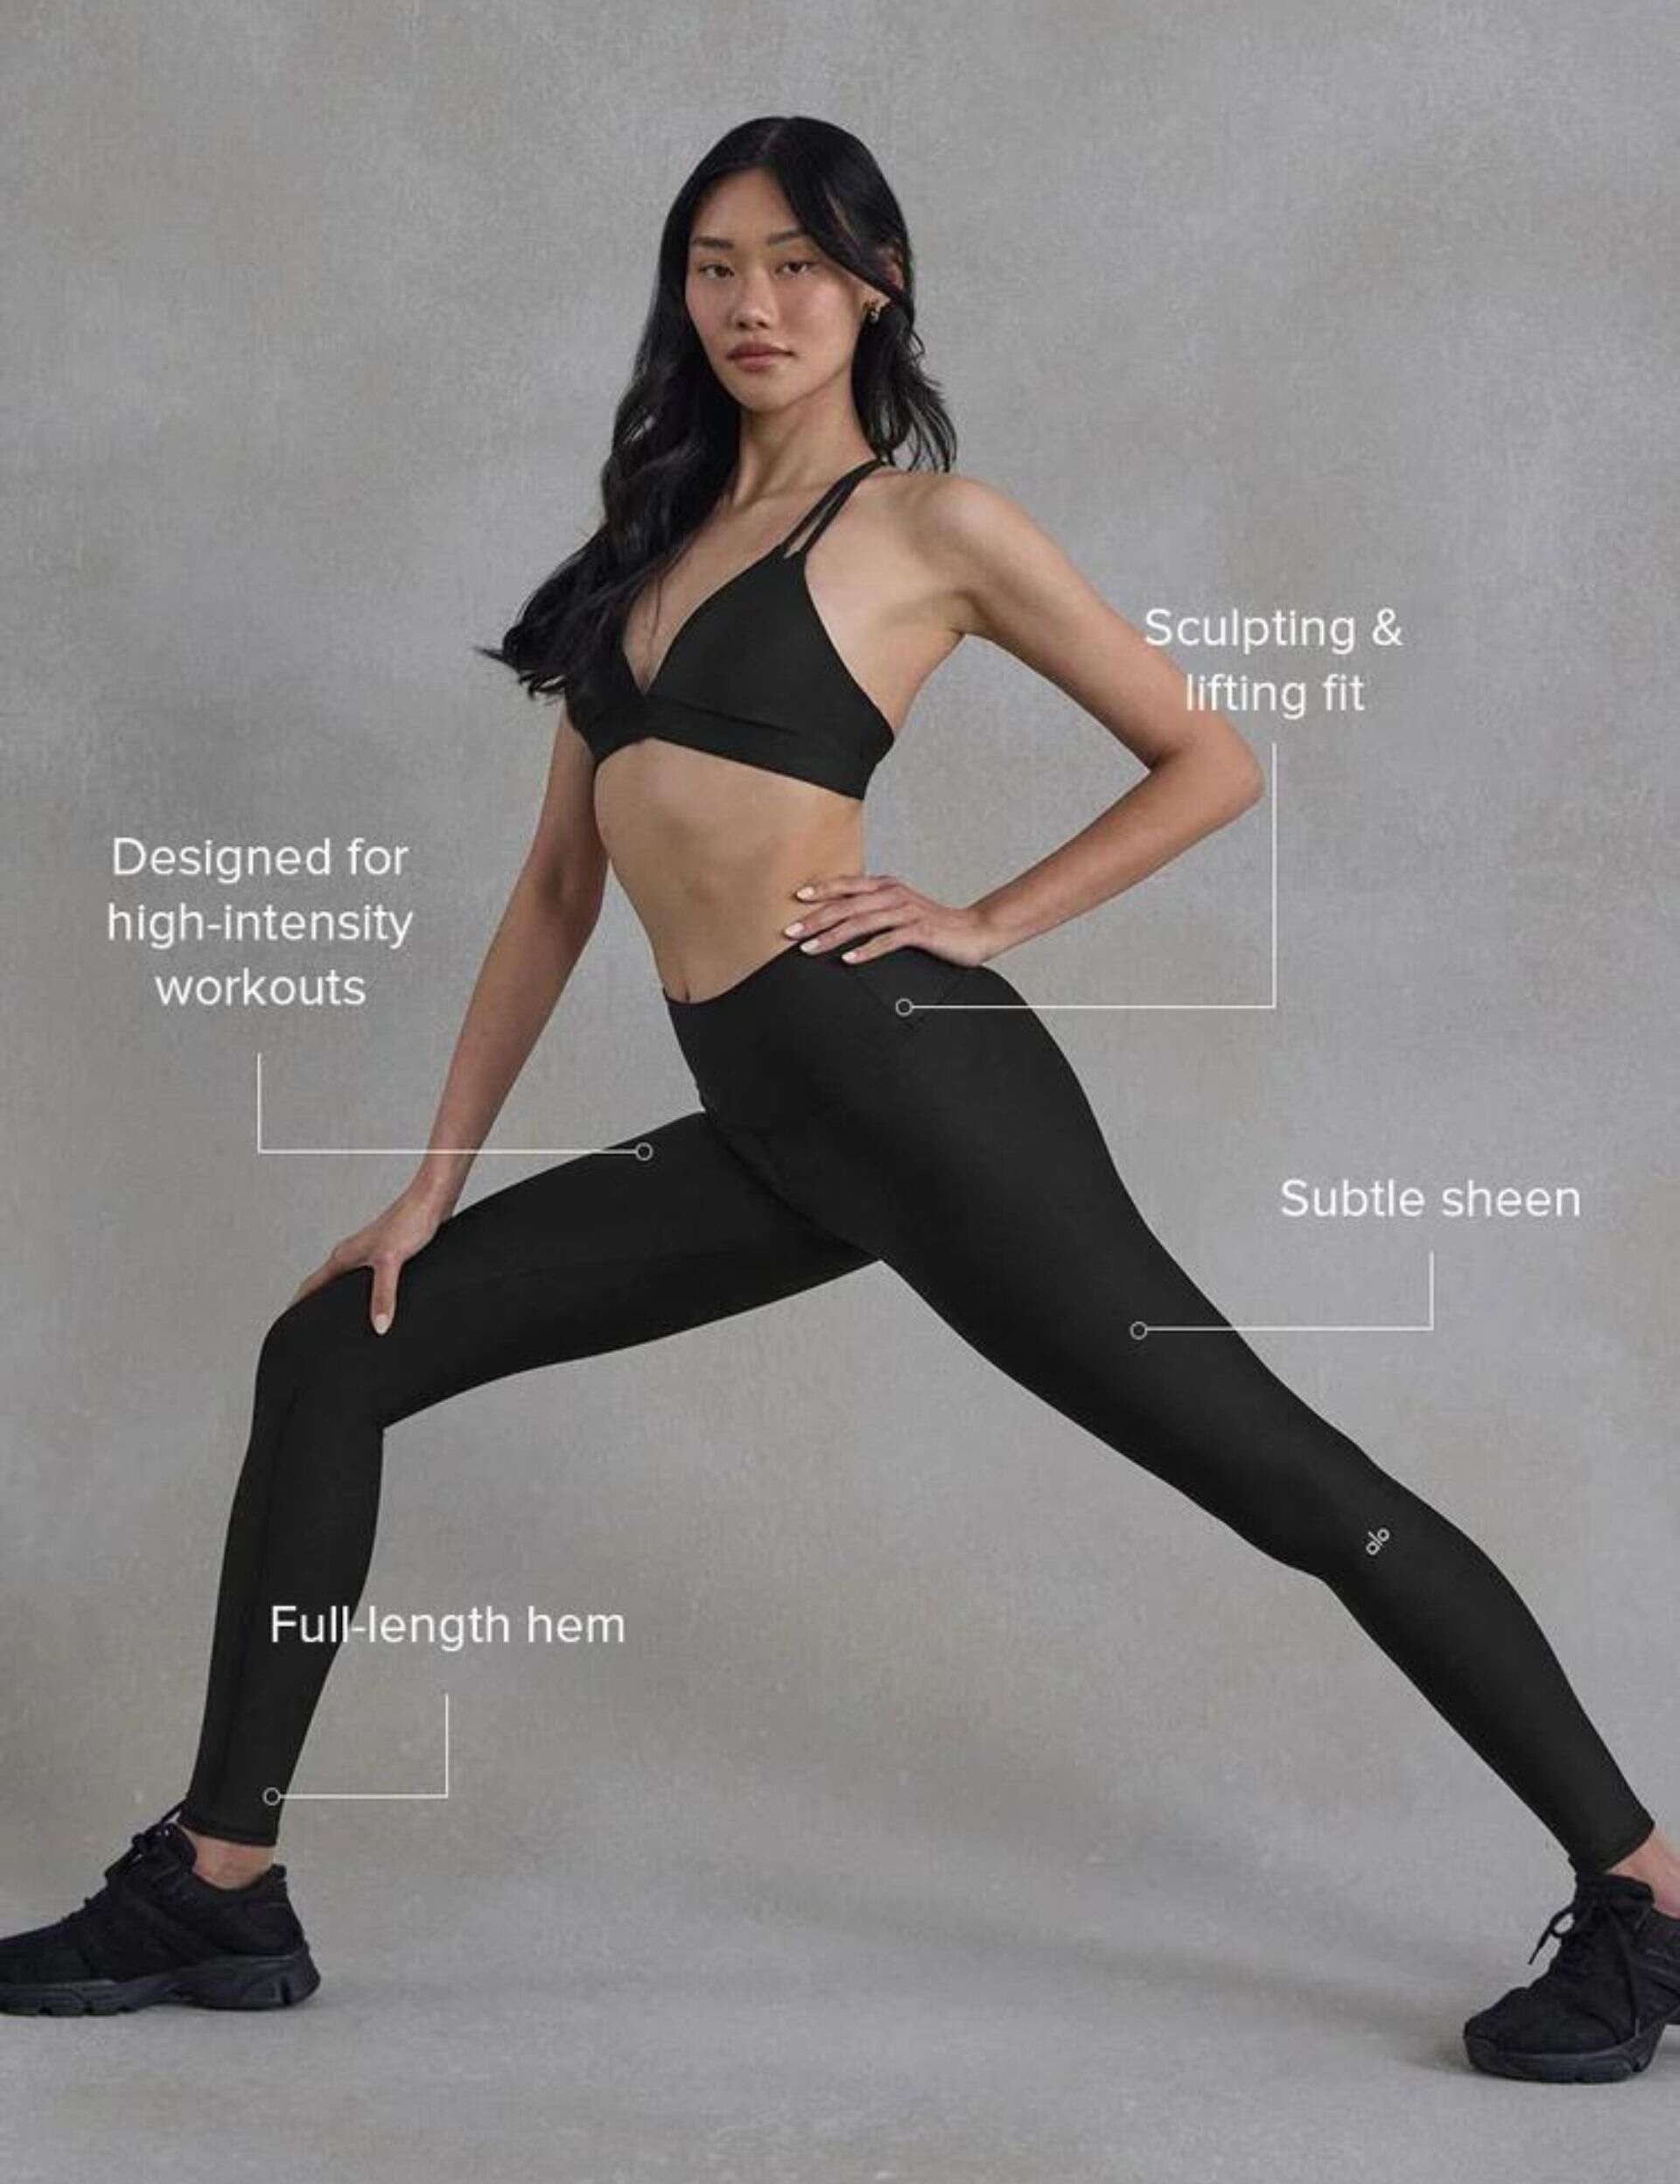 alo Airlift High Waist Suit Up Legging in Anthracite & Black